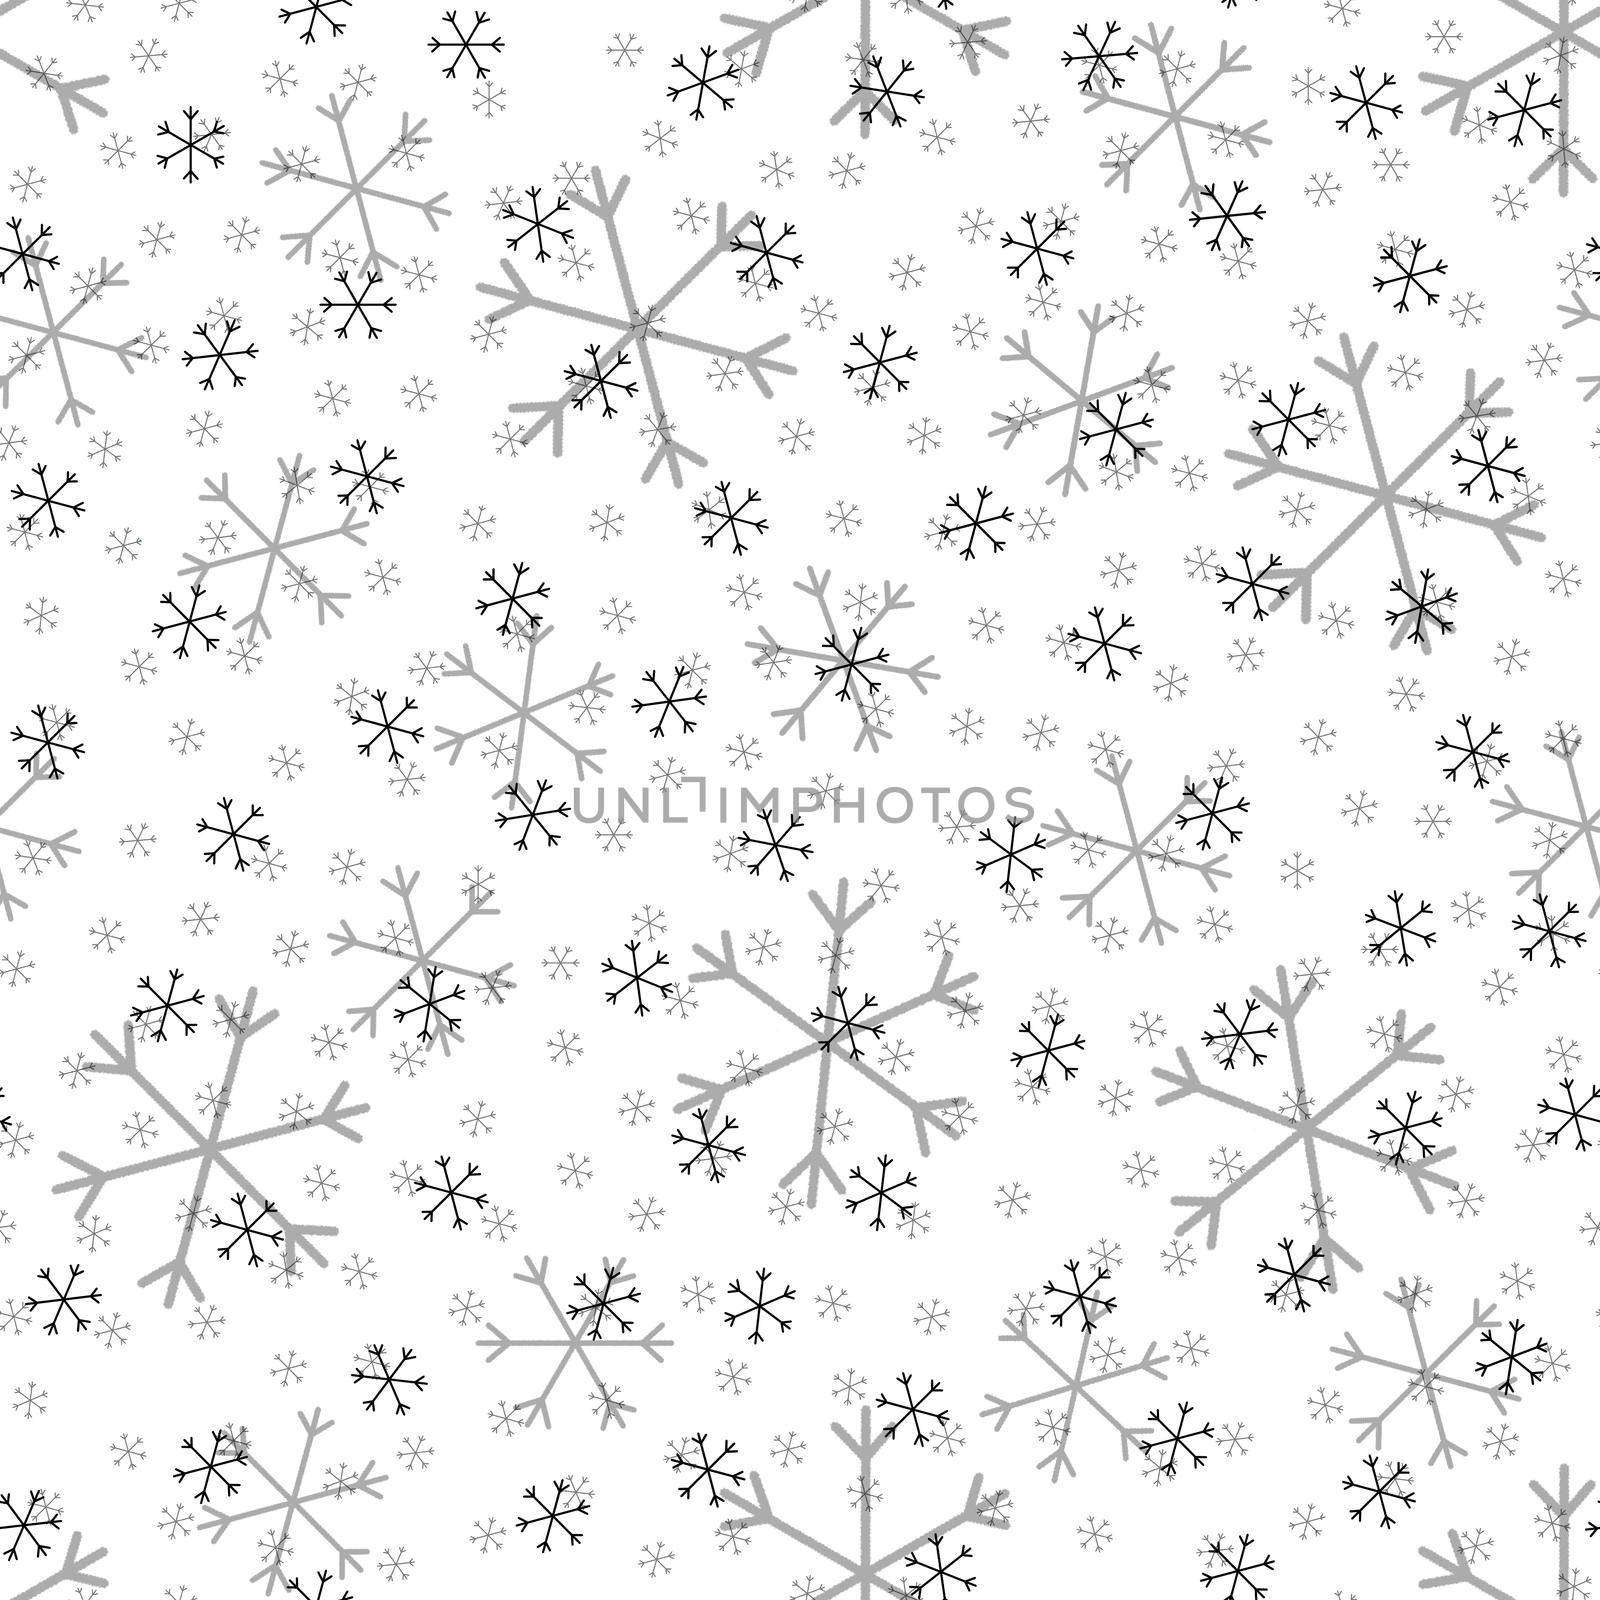 Seamless Christmas pattern doodle with hand random drawn snowflakes.Wrapping paper for presents, funny textile fabric print, design, decor, food wrap, backgrounds. new year.Raster copy.White black